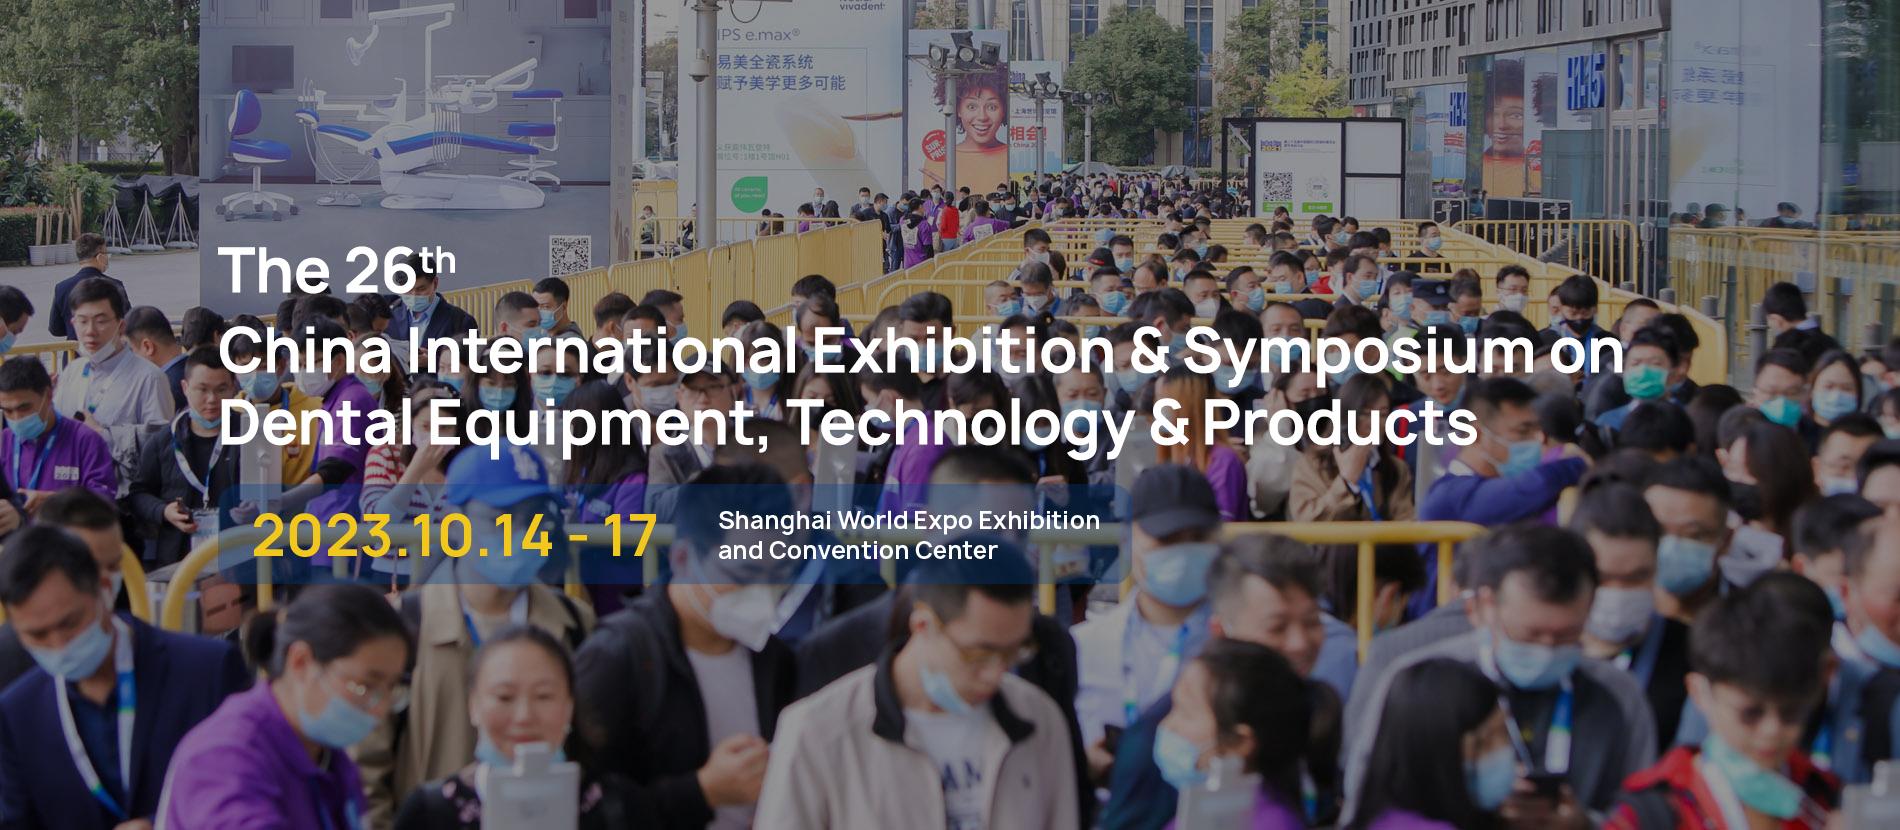 The 26th China International Exhibition and Symposium on Dental Equipment, Technology and Products